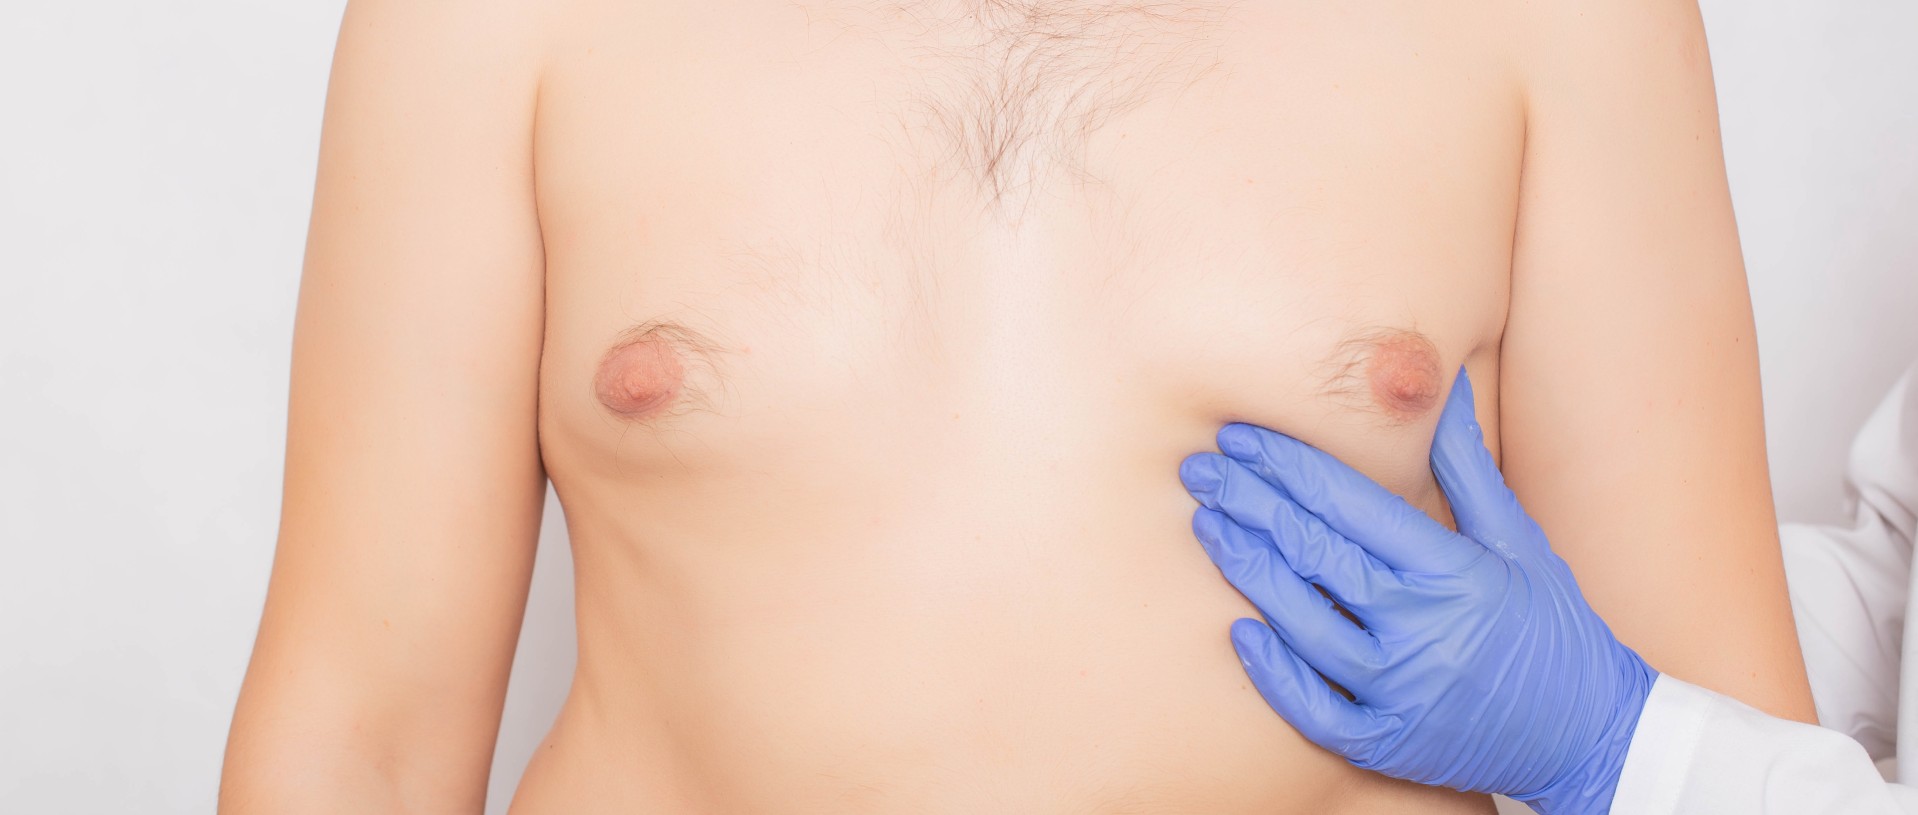 plastic surgeon doctor examines the male breast before surgery to reduce breas